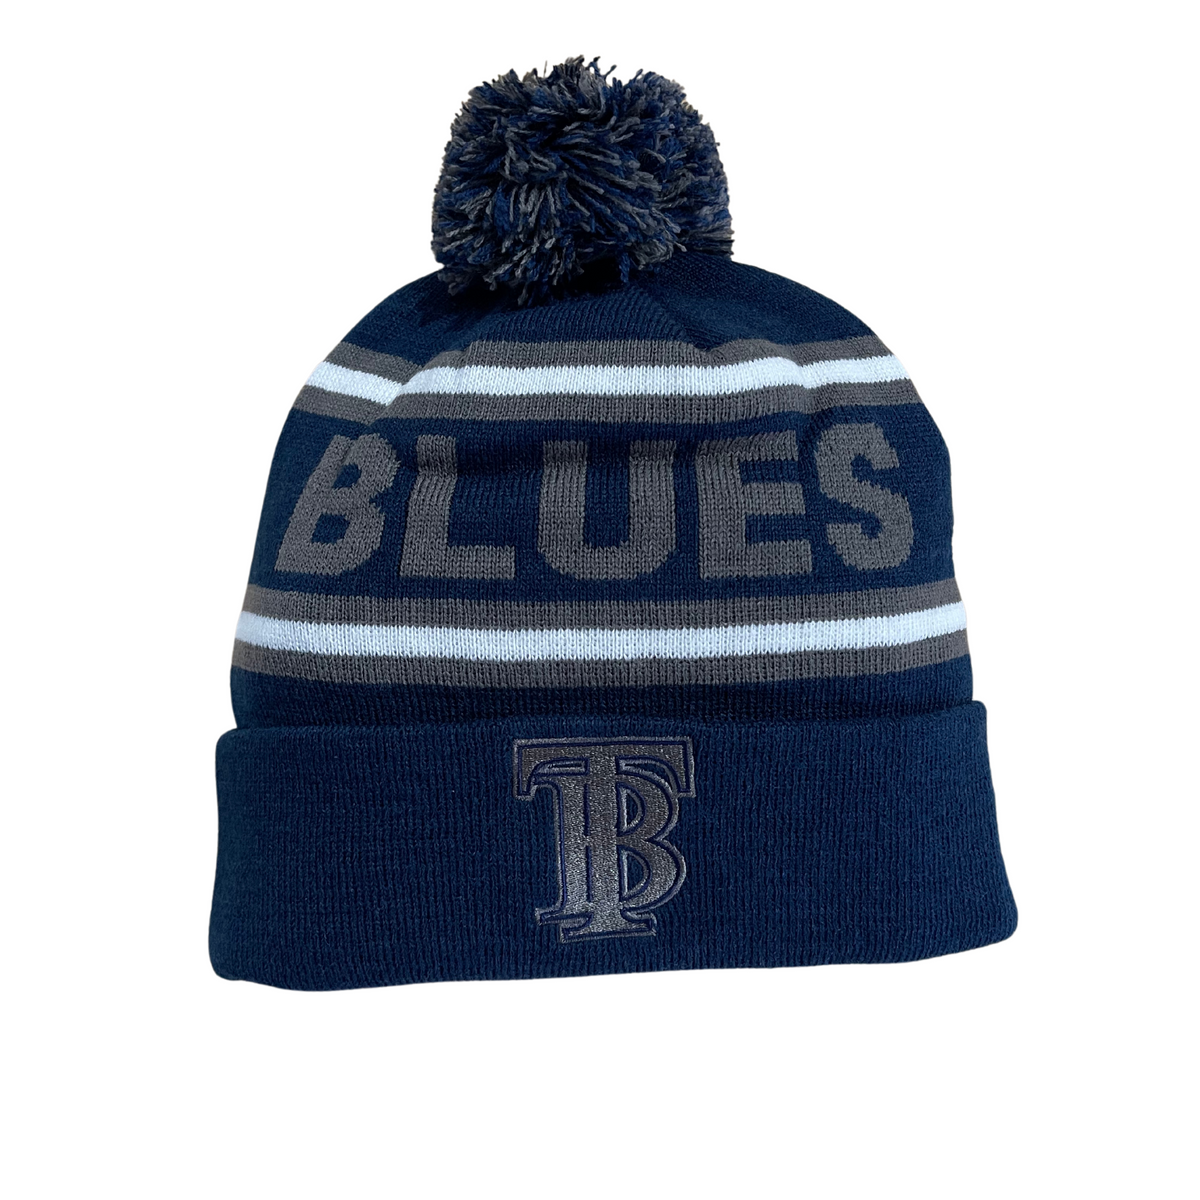 Tumby Bay Blues Woven Banded Knit Beanie Logo Embroidered Navy TB Beanie